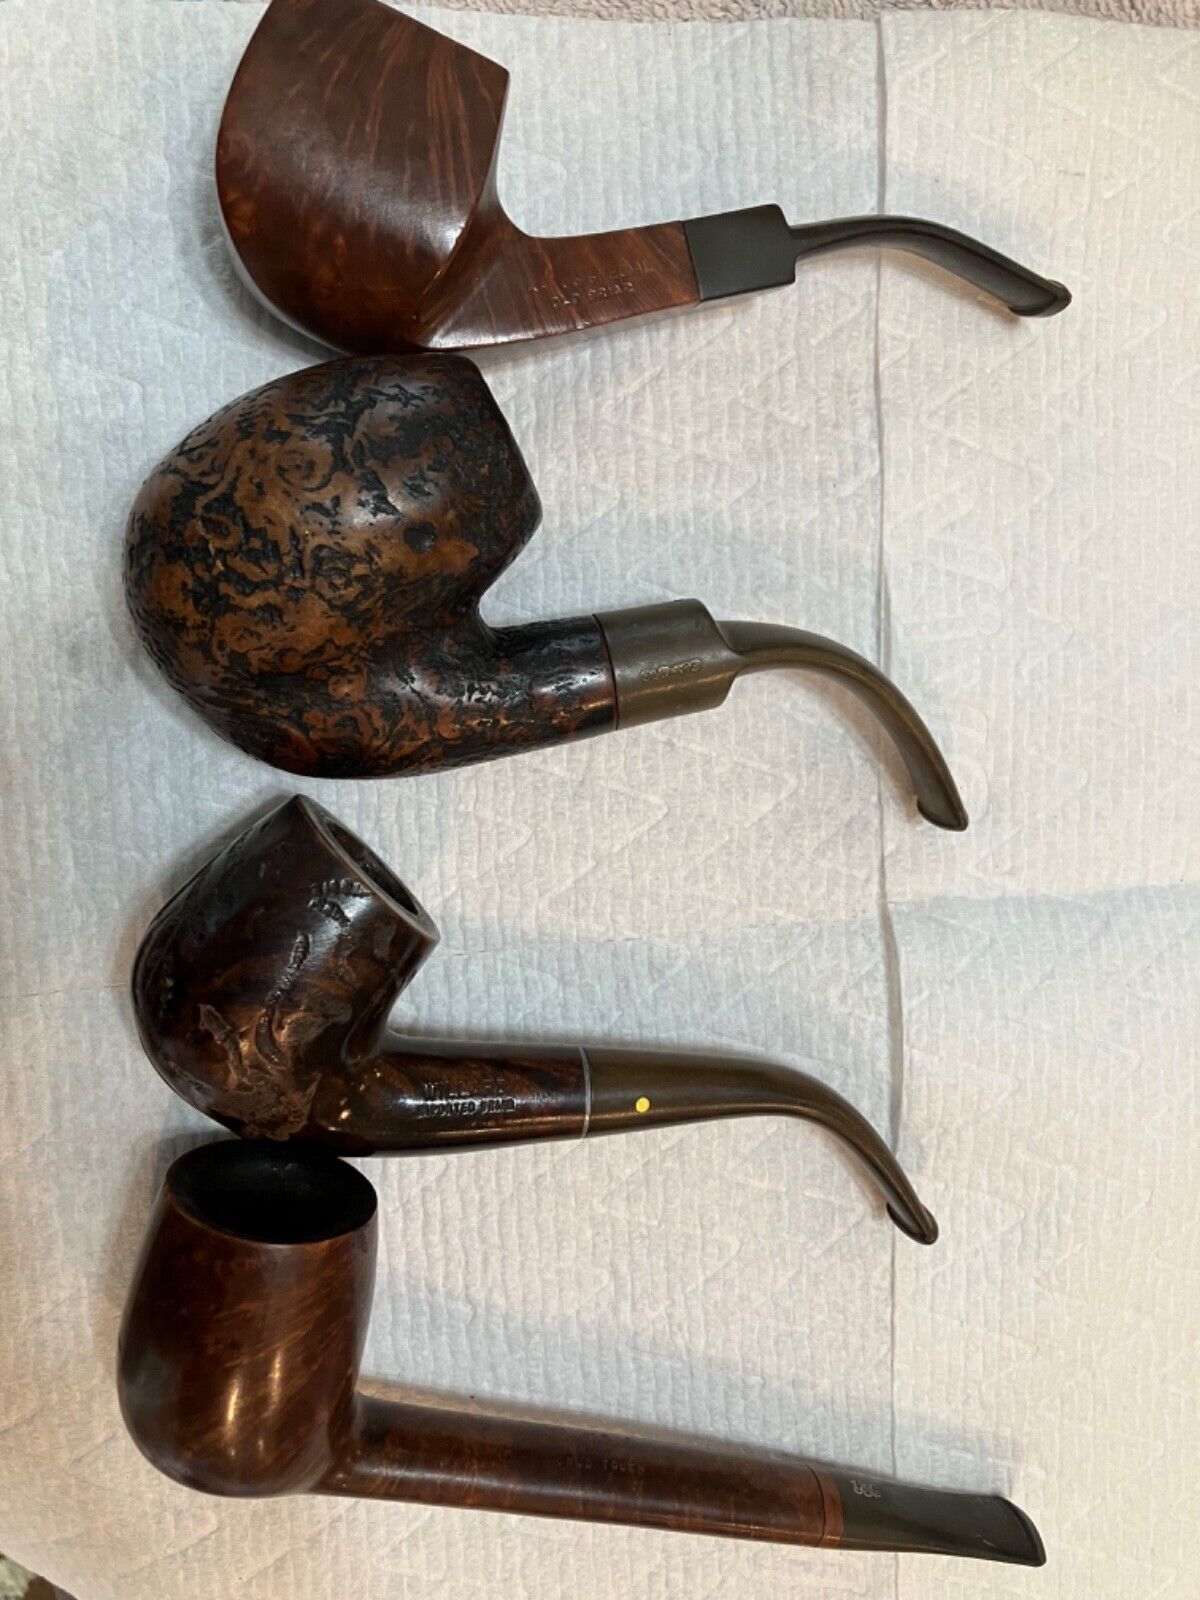 Lot of 4 Estate Pipes, Old Briar, Willard, Uncle Paul, Yves St. Claude